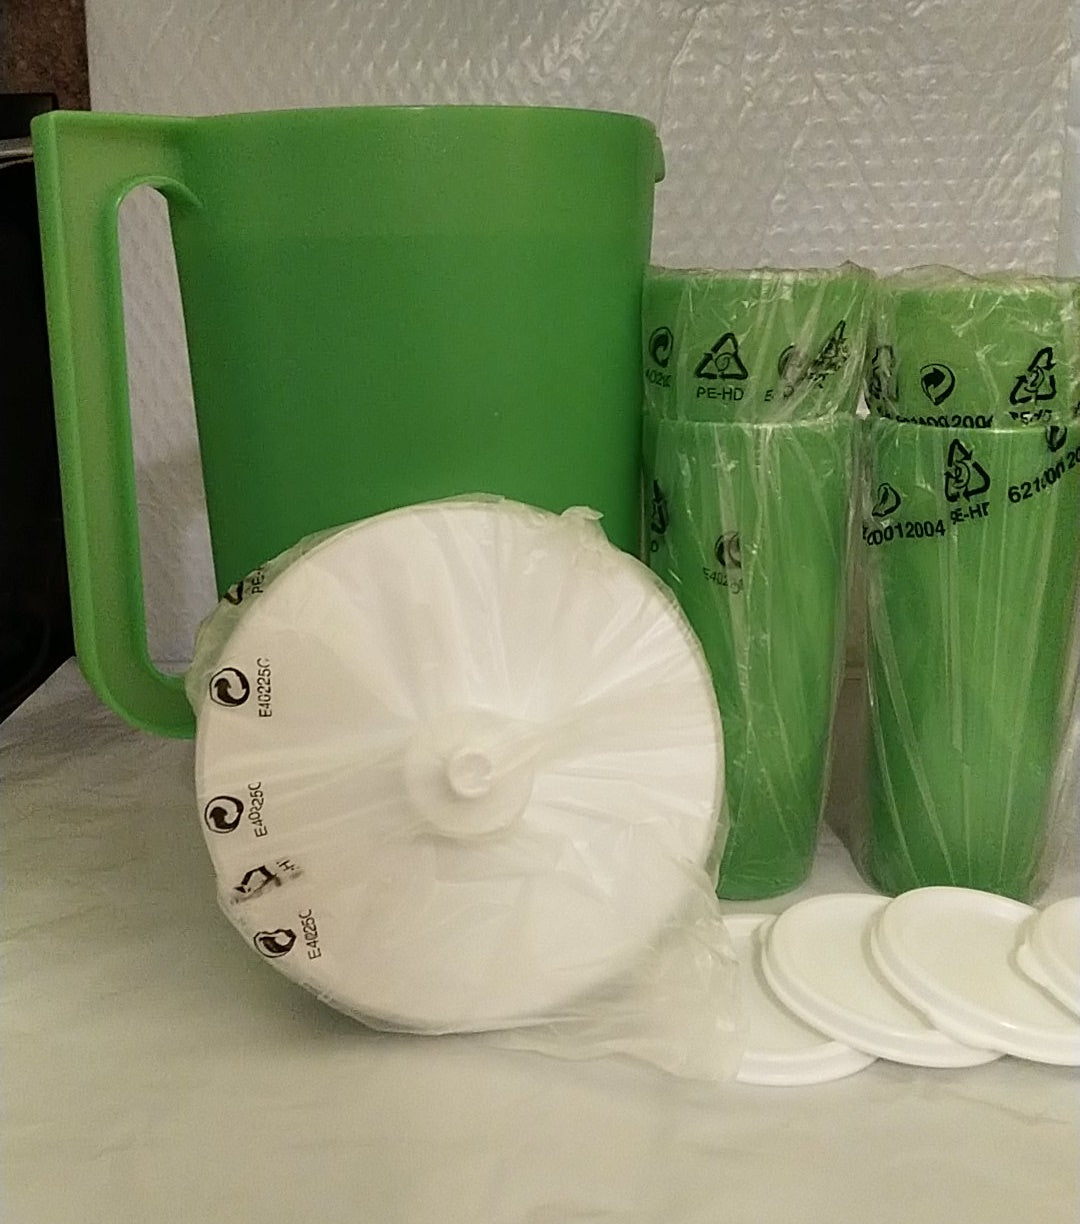 TUPPERWARE BEVERAGE SERVING SET 1 GALLON CLASSIC PITCHER & 4 TUMBLERS LIME GREEN SNOW WHITE SEALS - Plastic Glass and Wax